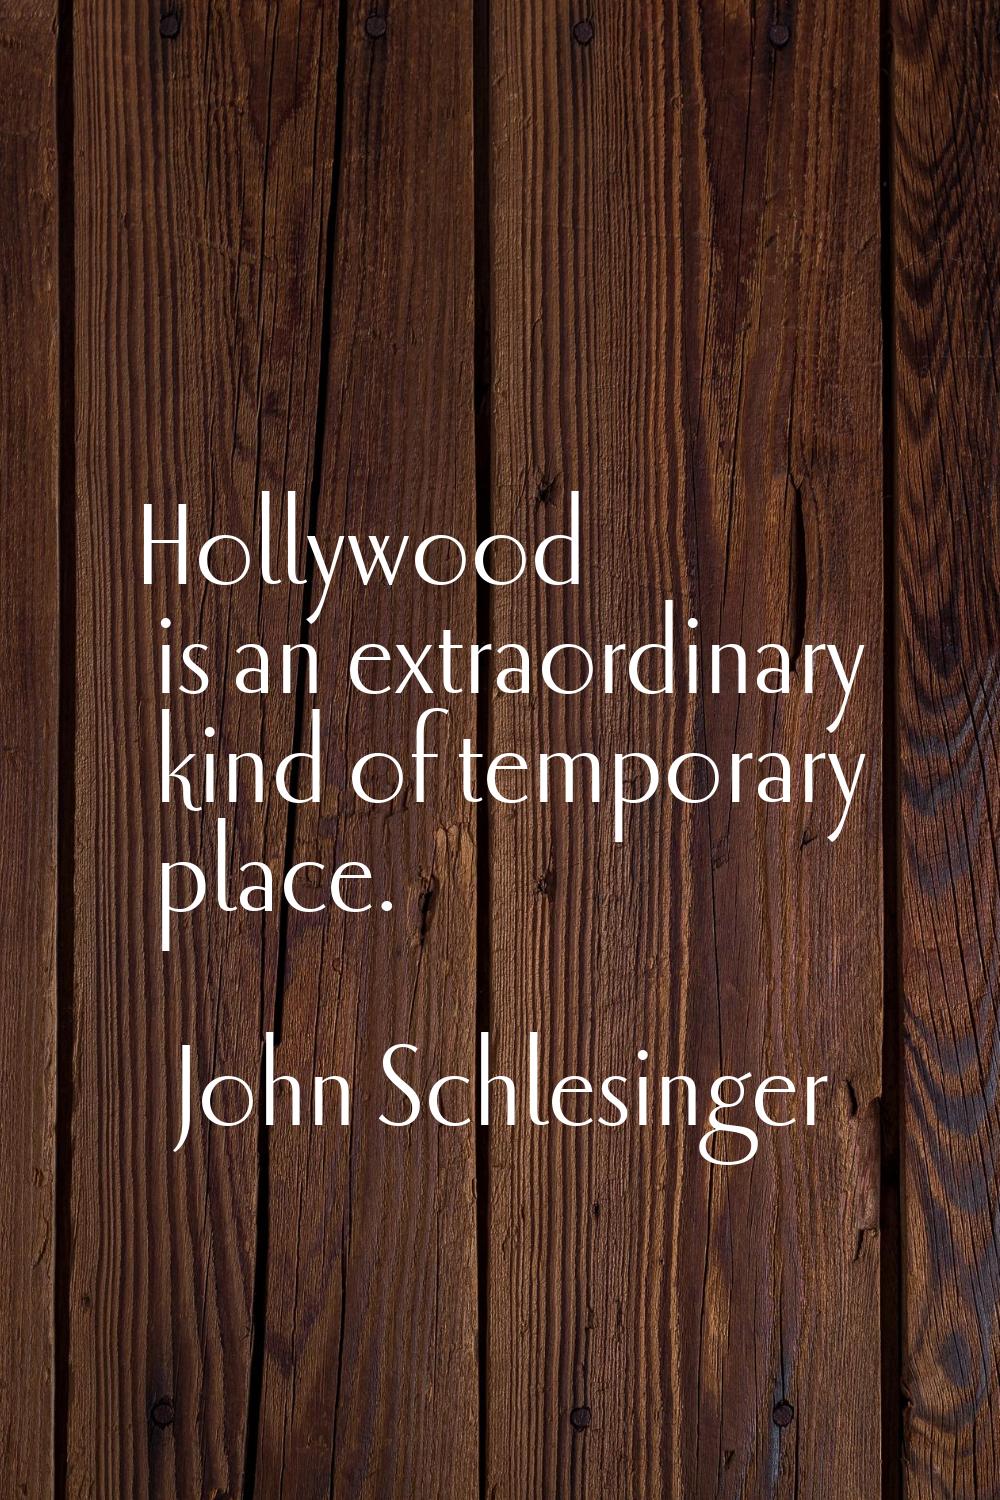 Hollywood is an extraordinary kind of temporary place.